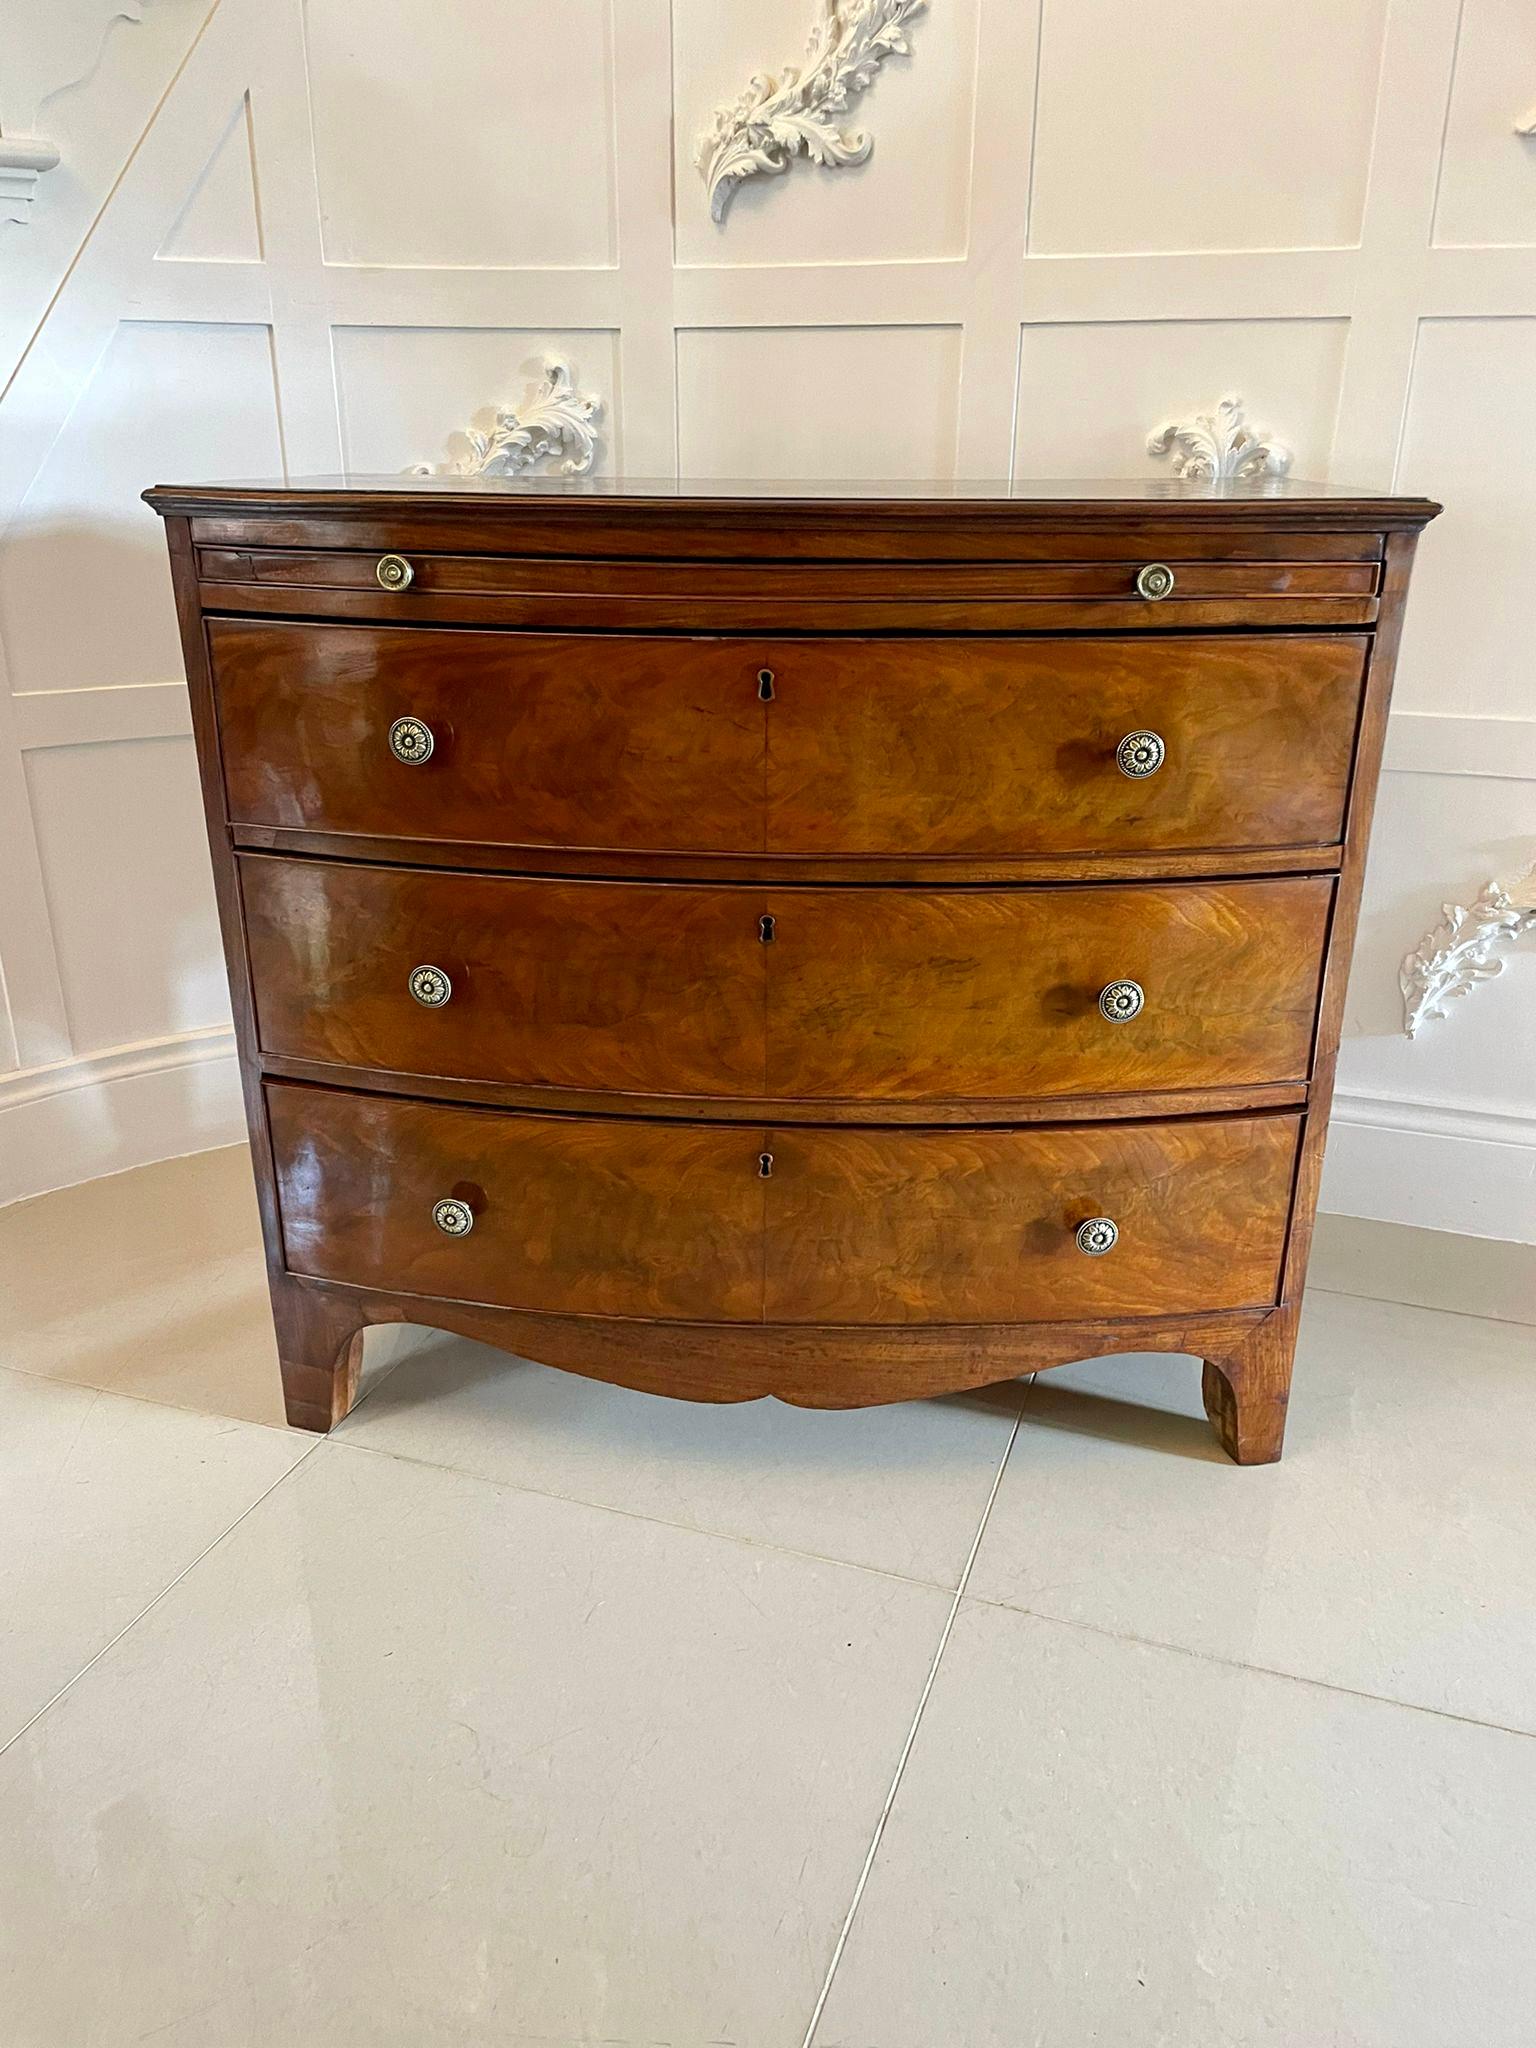 Antique George III quality figured mahogany bow front chest of 3 drawers having a quality figured mahogany bow front shaped top above a brushing slide, 3 figured mahogany bow fronted drawers with a cockbeeded edge and quality oak linings, brass